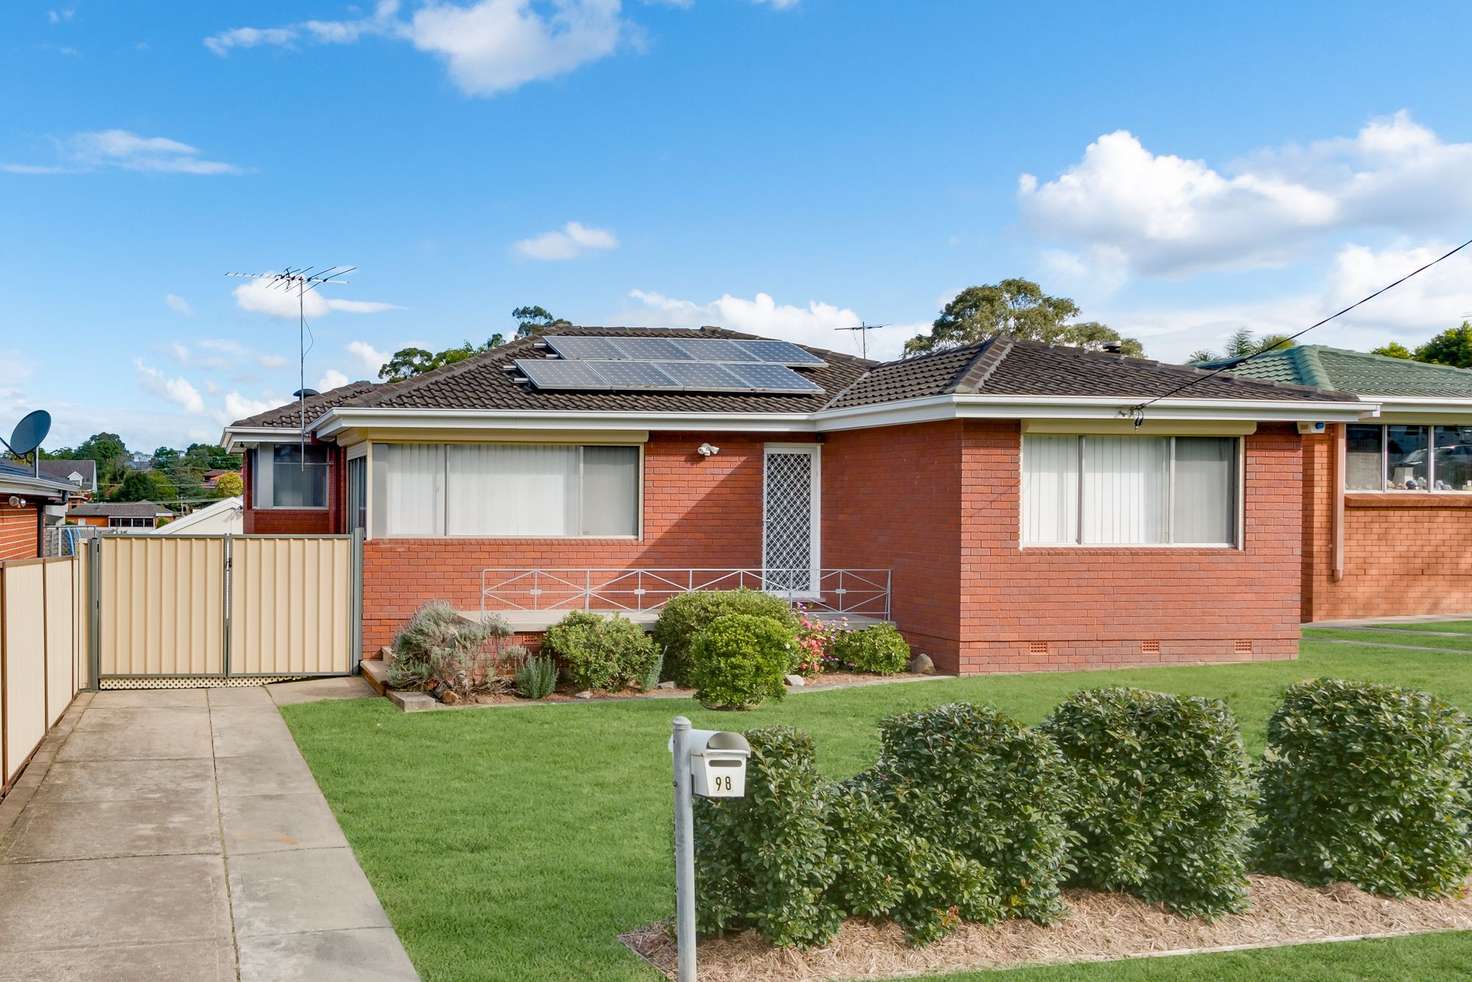 Main view of Homely house listing, 98 Macquarie Avenue, Campbelltown NSW 2560